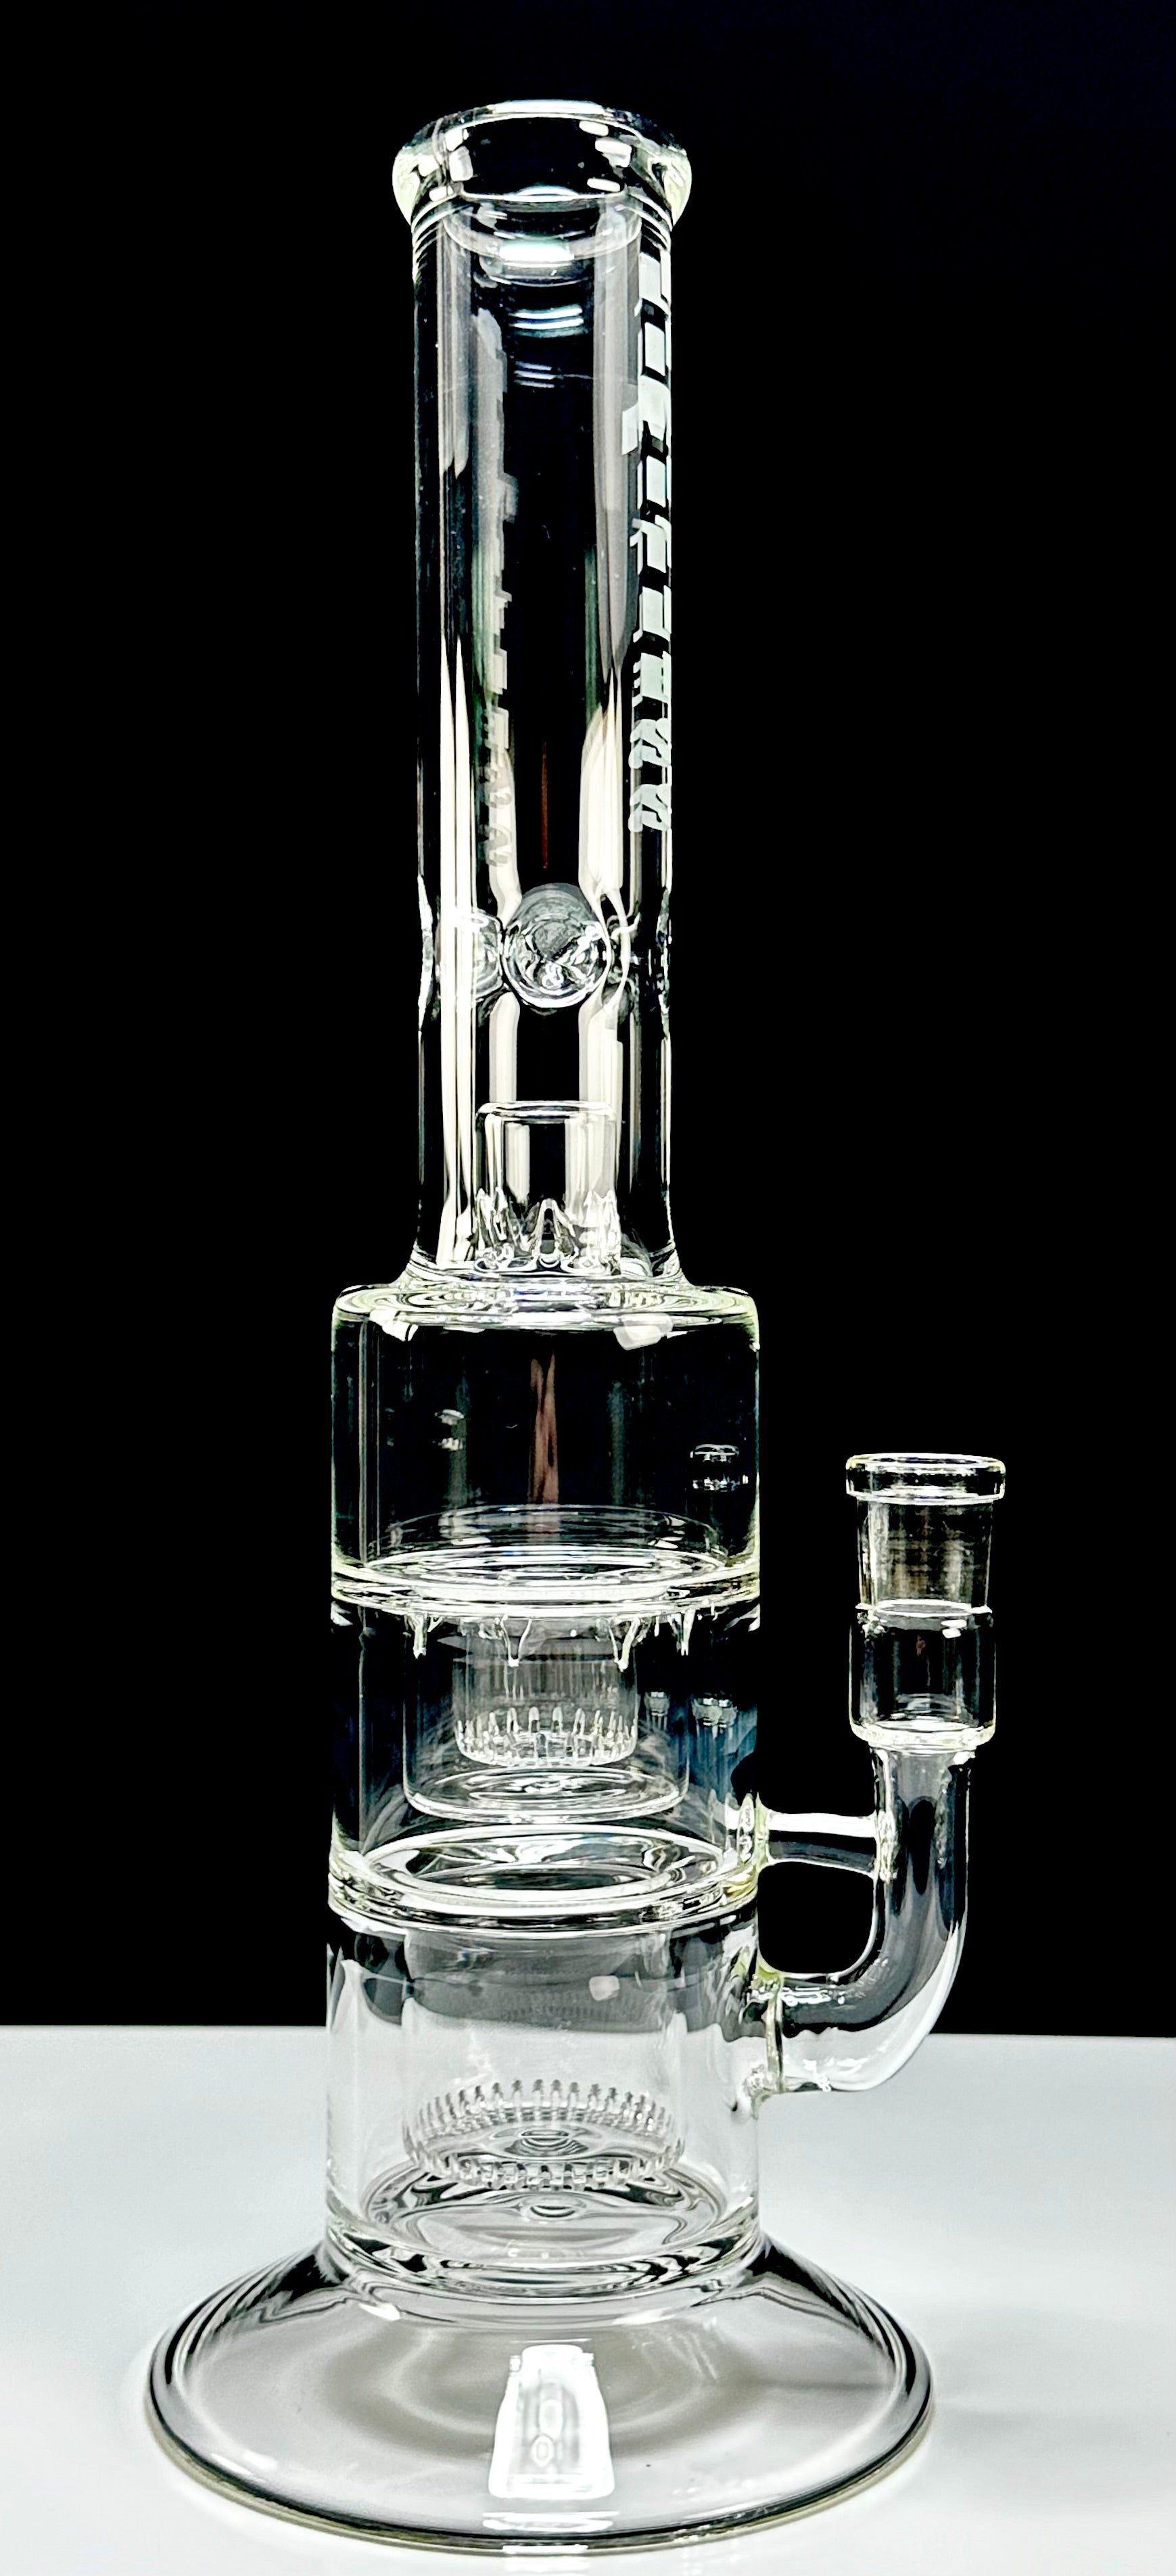 LIMITLESS GLASS 18mm DOUBLE SHOWERHEAD TUBE